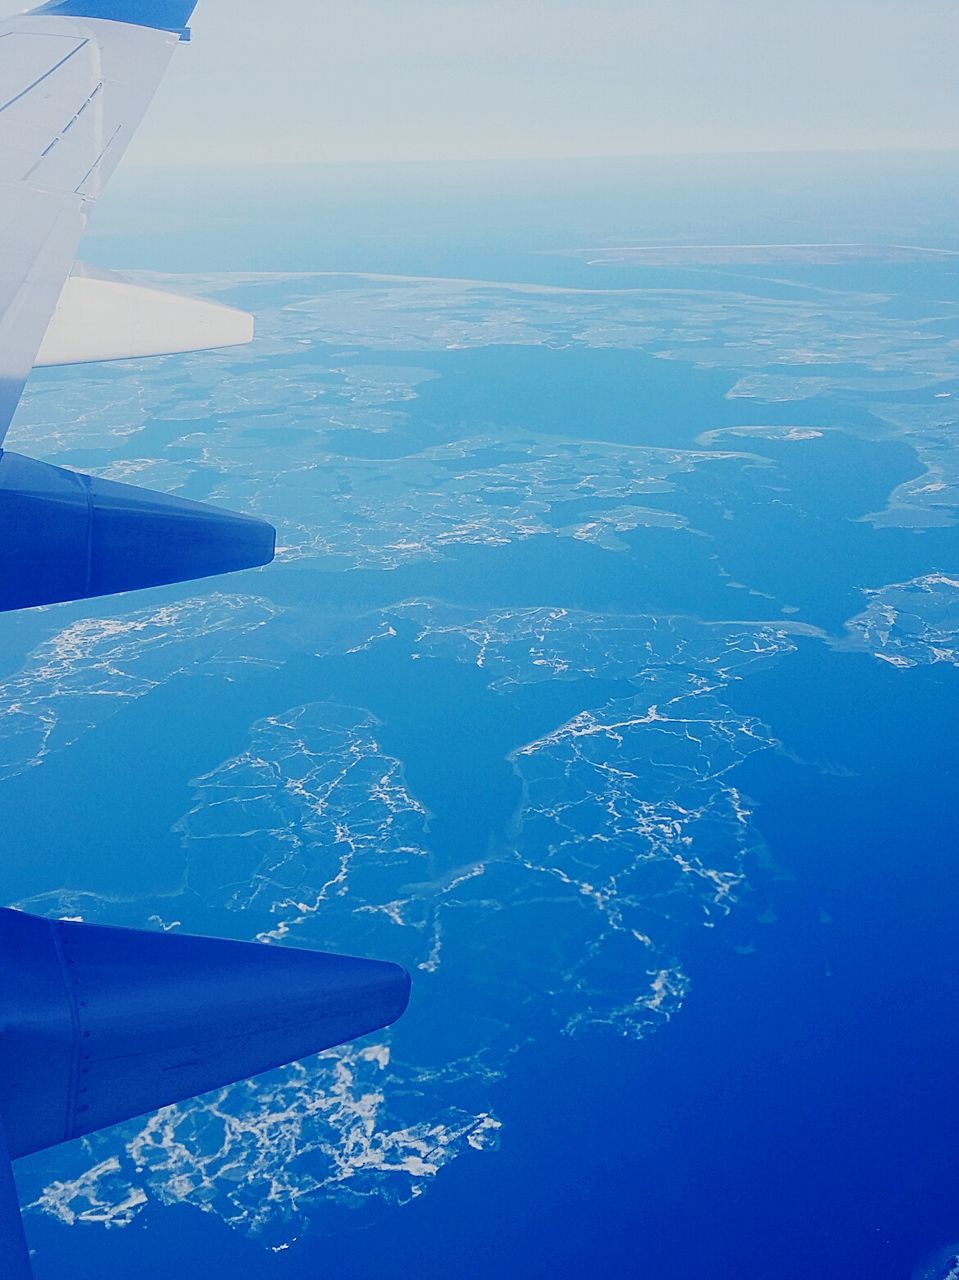 AERIAL VIEW OF AIRCRAFT WING OVER SEA